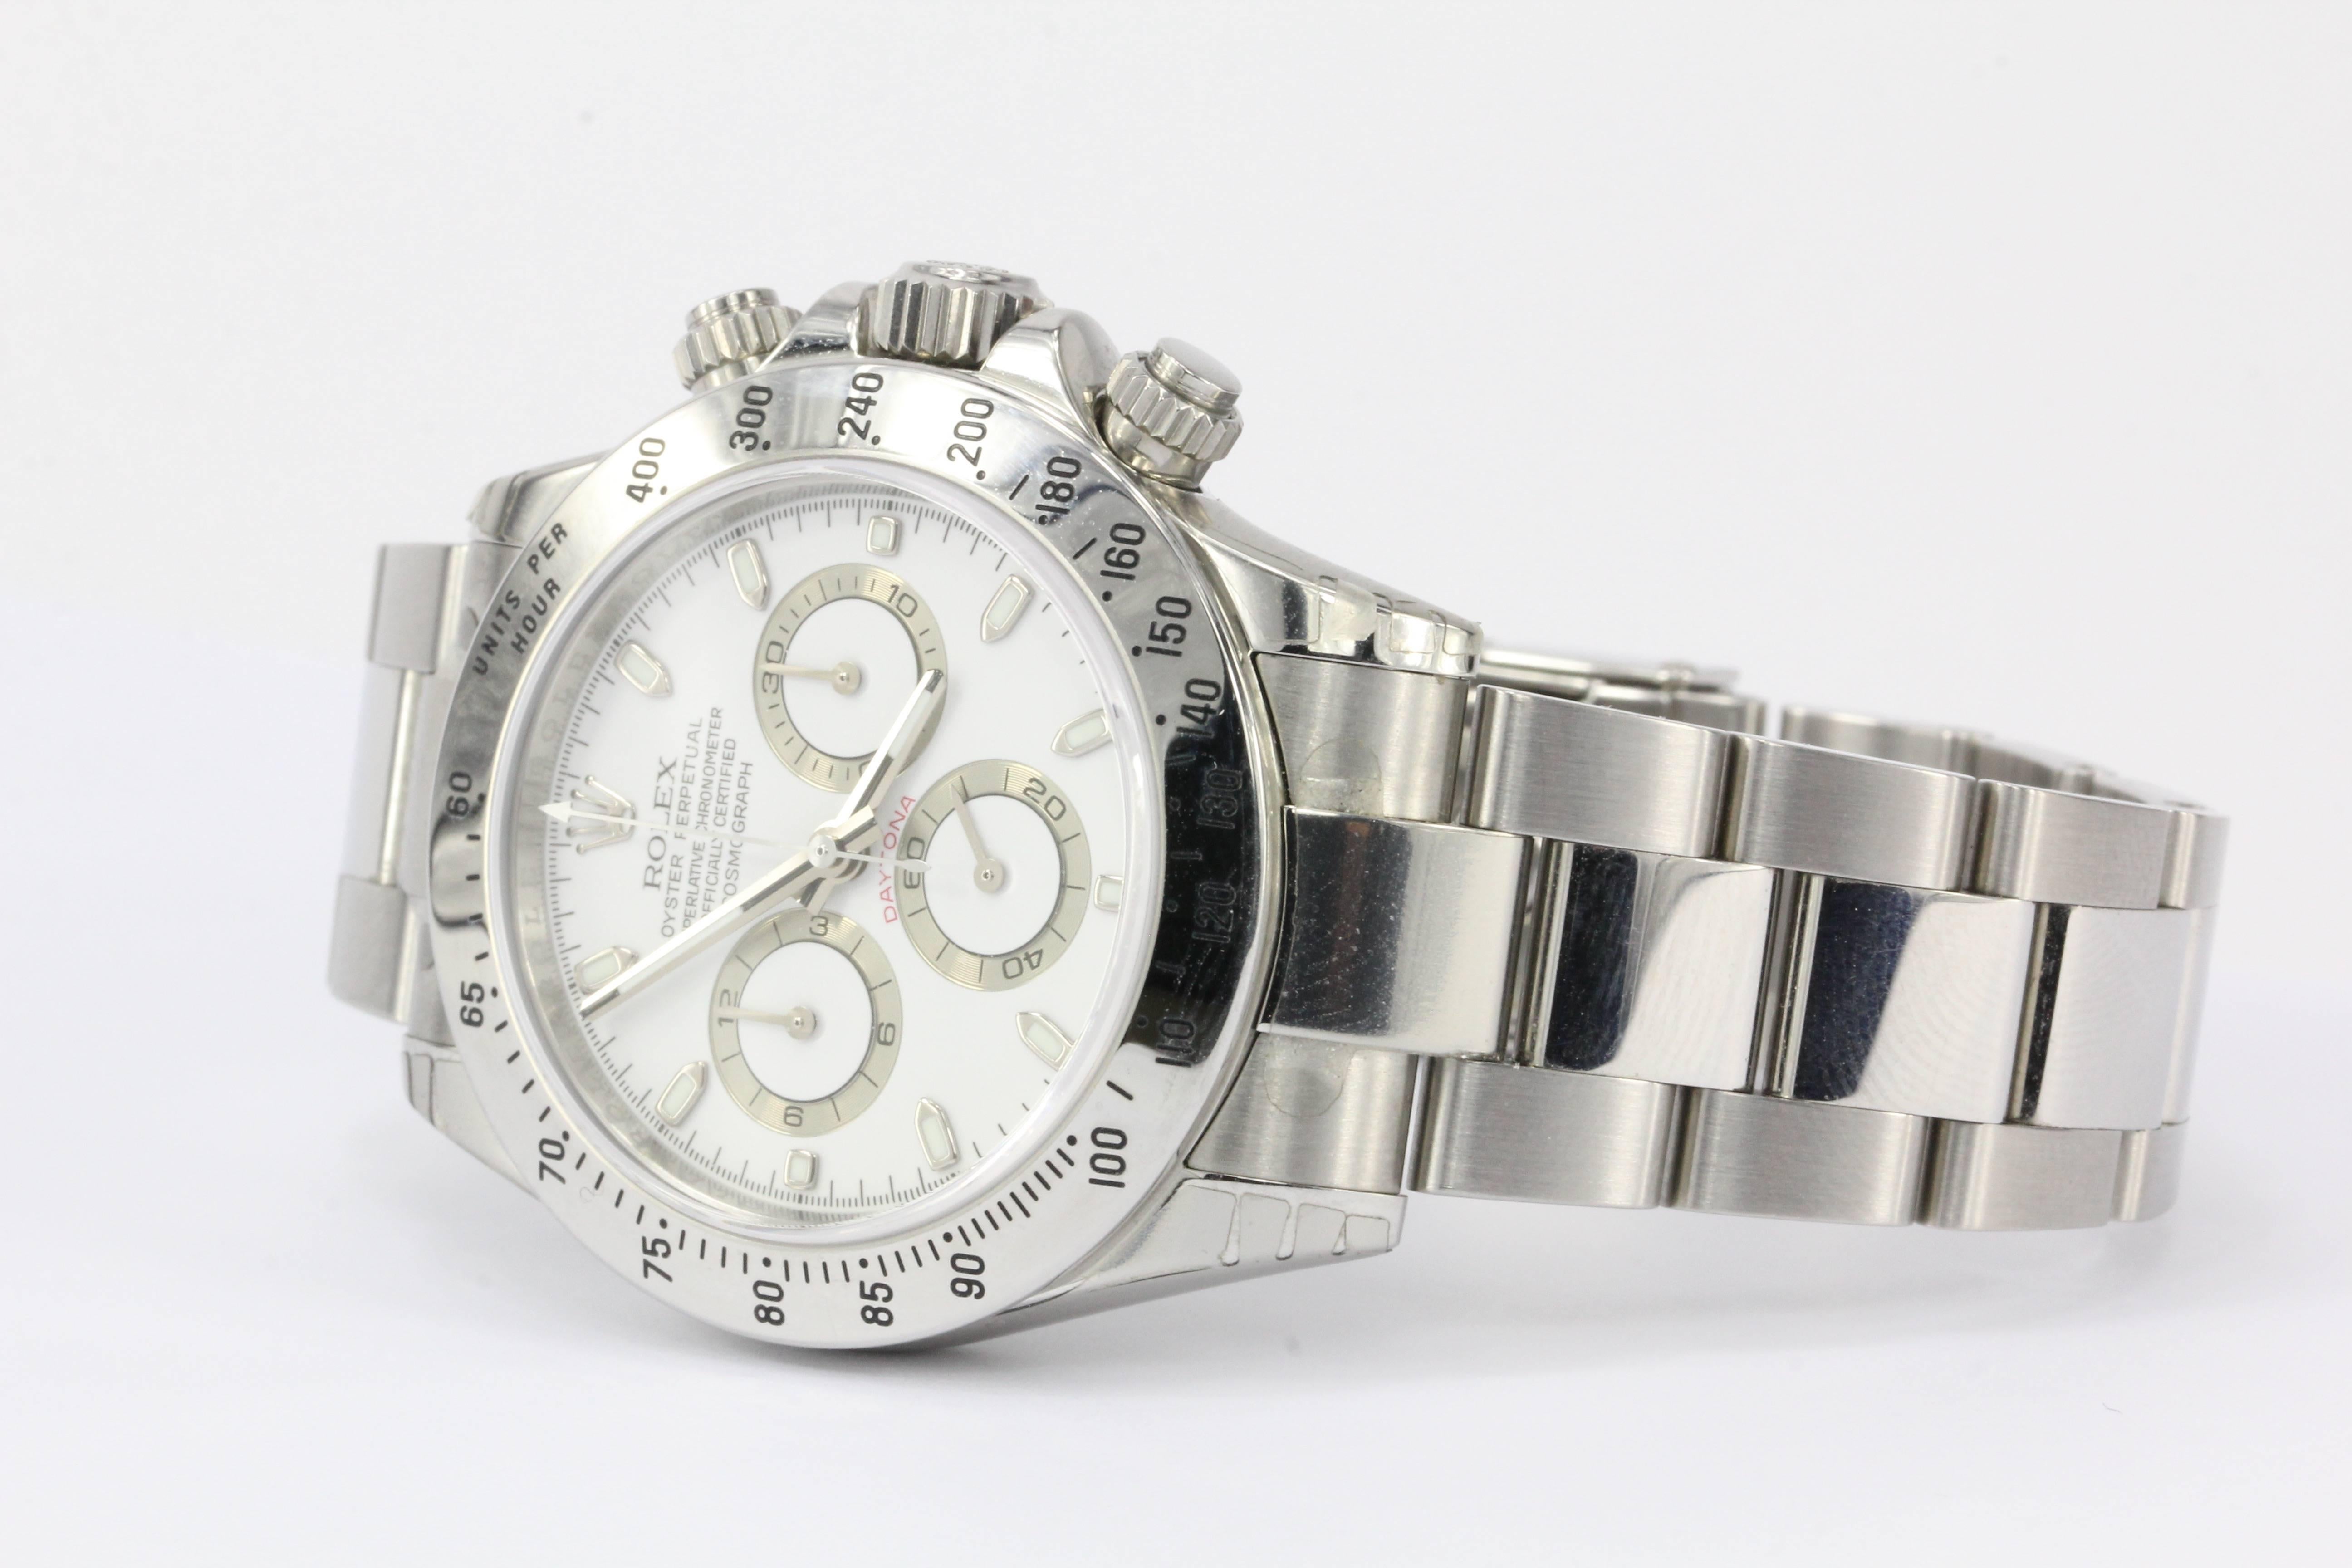 Rolex Daytona 116520

Circa 2008

Sapphire Crystal

Incredible Condition.  Only worn a few times and the stickers and original bezel cover are still on the watch!

Comes with Original Box and Paperwork